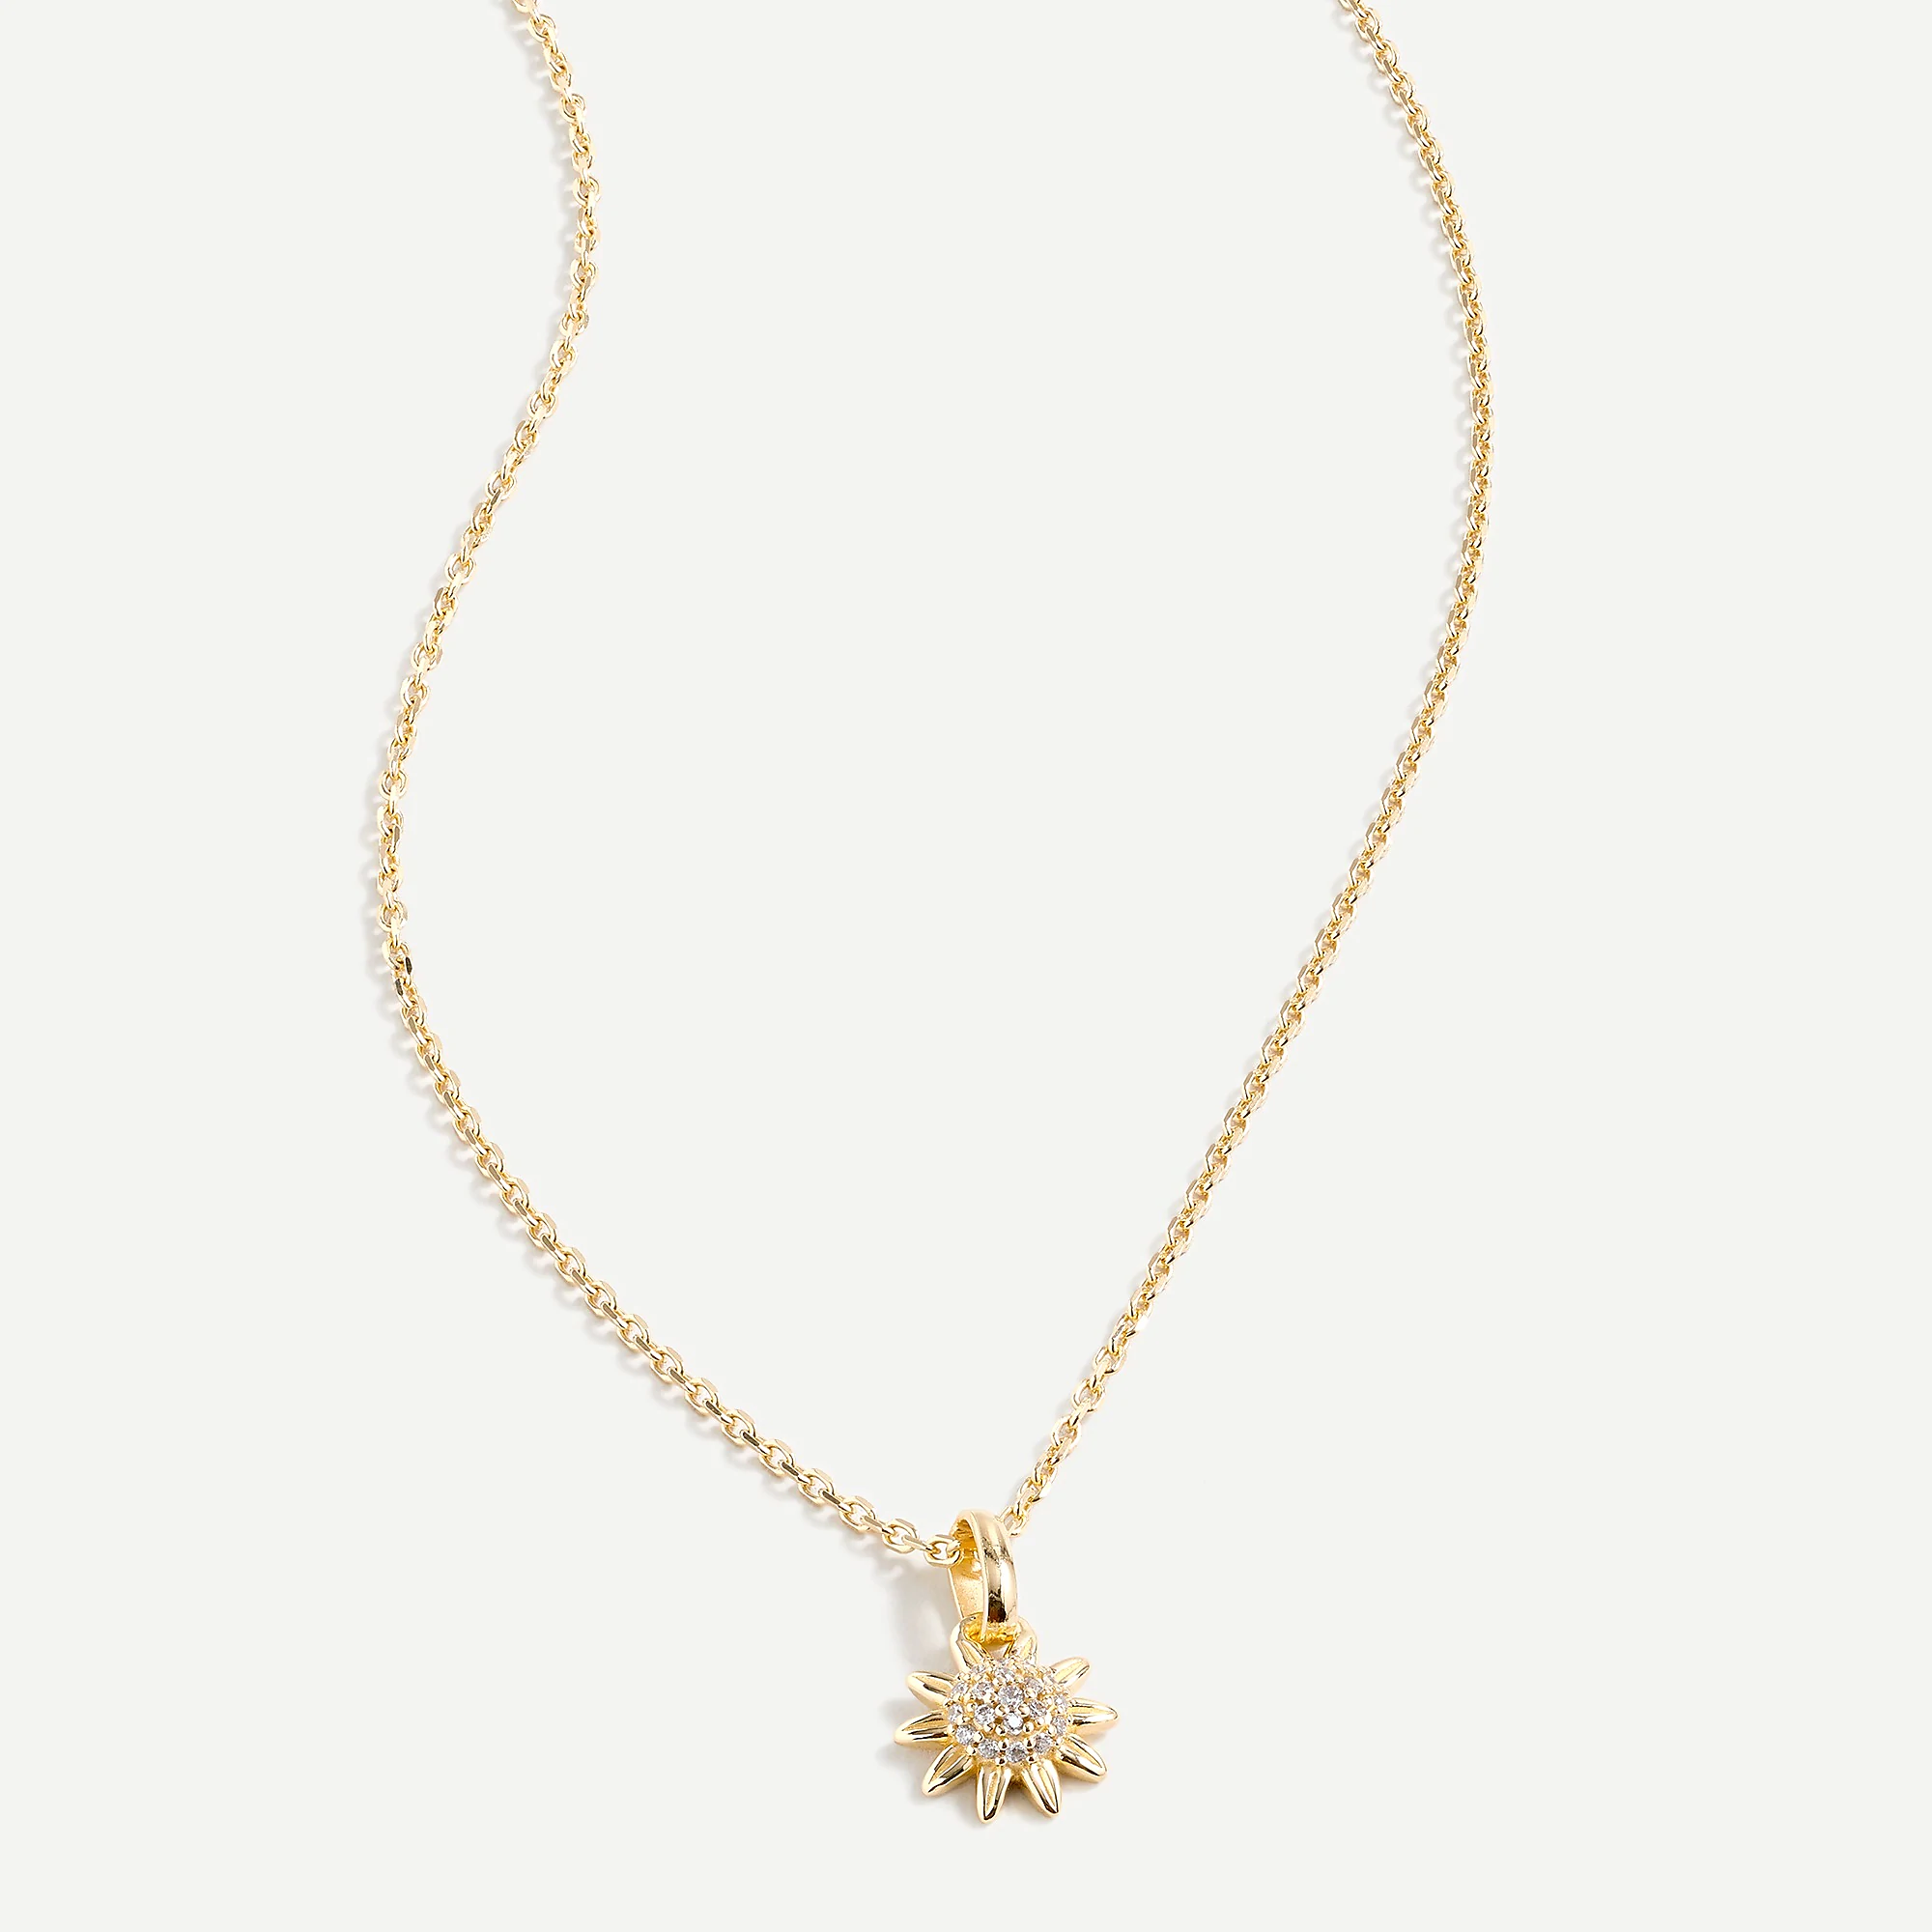 Demi-fine 14k gold-plated sunflower necklace